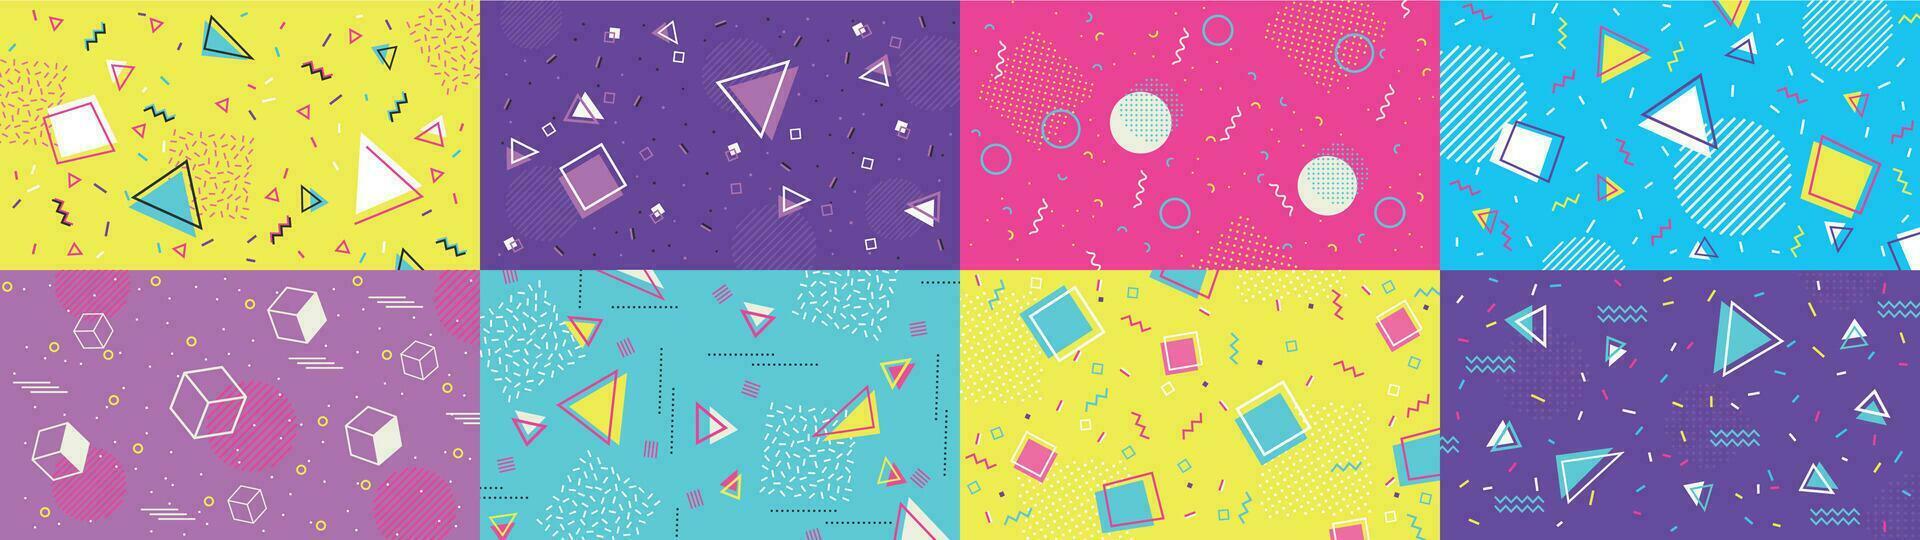 Funky 90s memphis background. Abstract hipster shapes and funky geometric patterns, 1980s pop backdrop vector illustration set